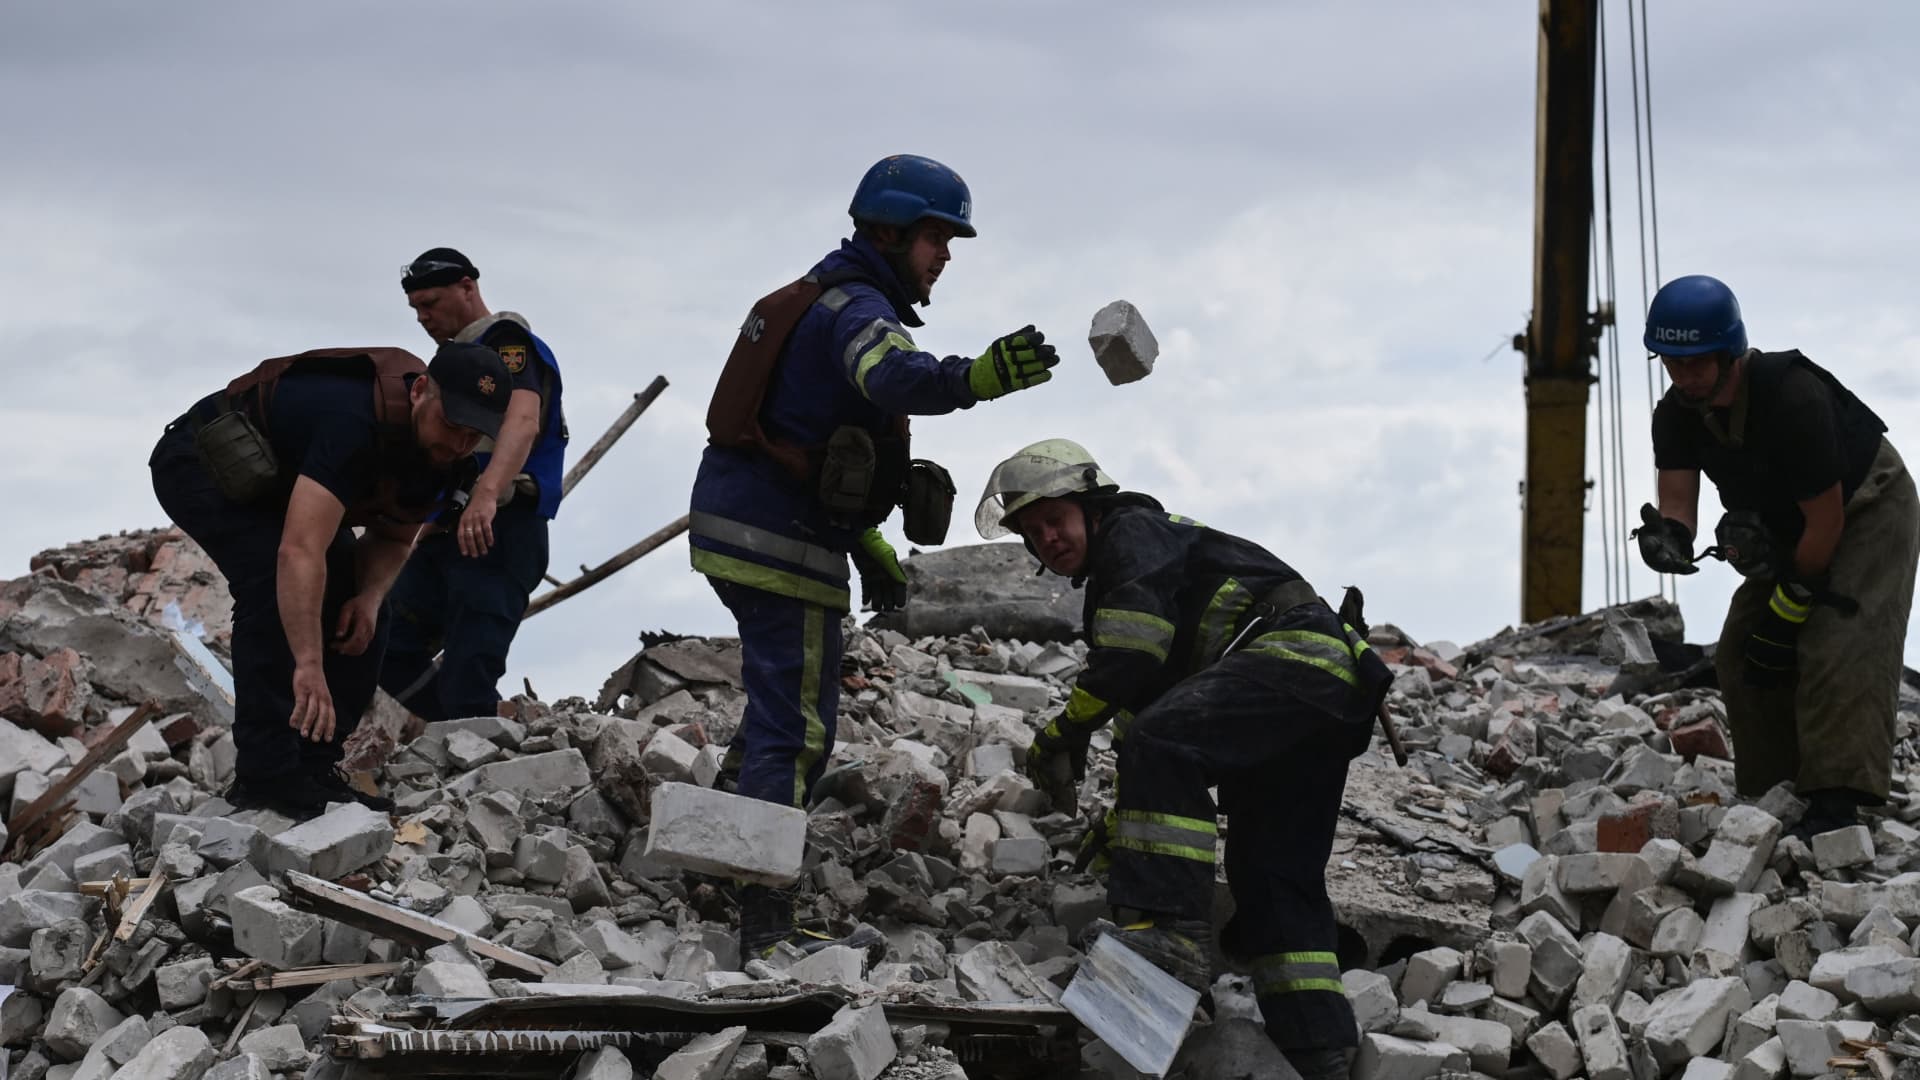 Rescuers clear the scene after a five-storey residential building was struck in Chasiv Yar, Bakhmut District, eastern Ukraine, on July 10, 2022.